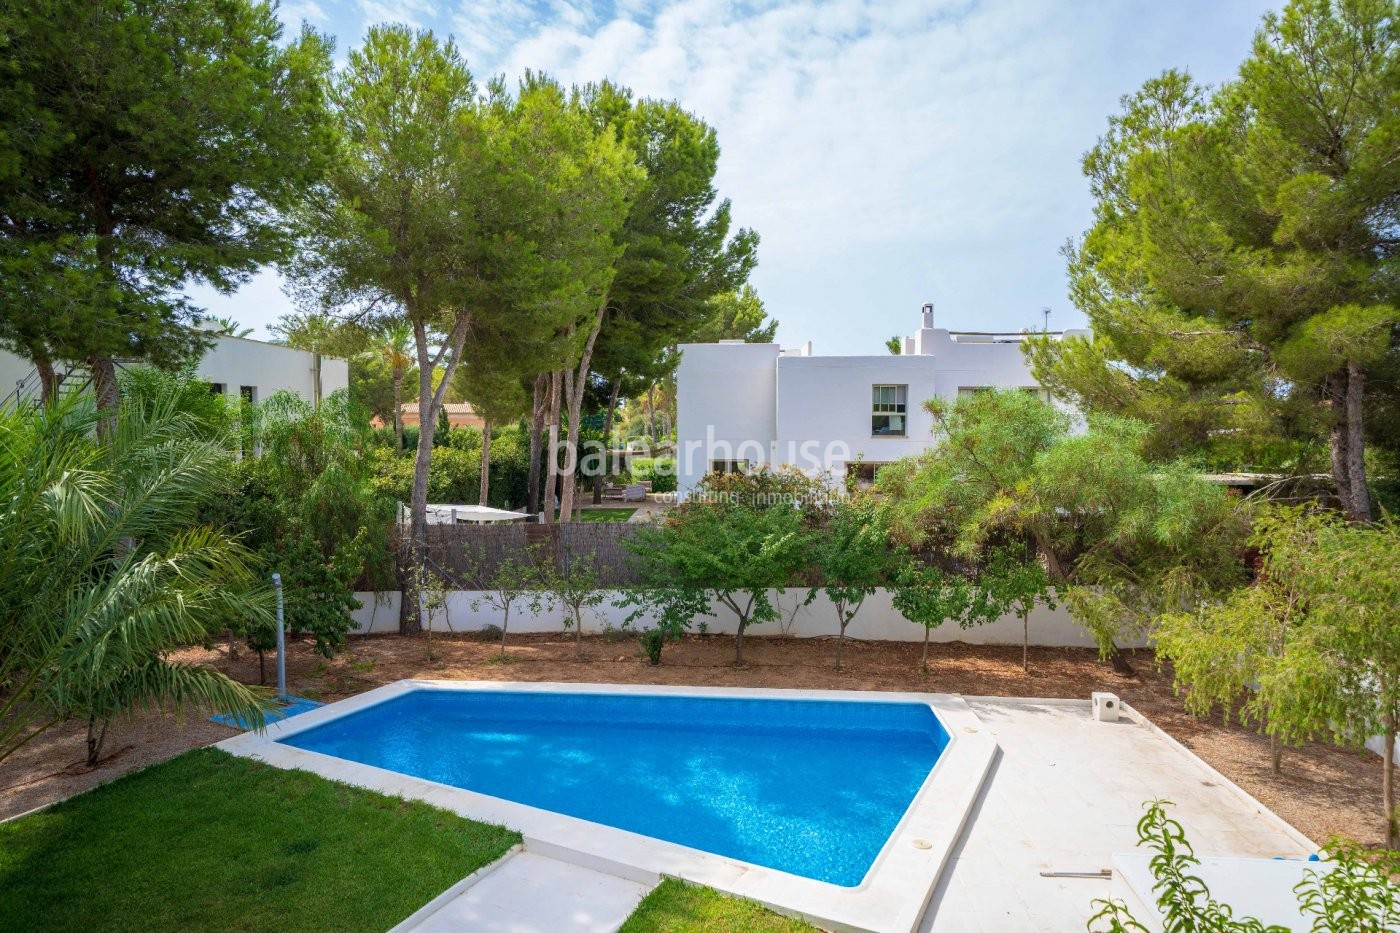 Charming Mediterranean villa with swimming pool, terraces and garden